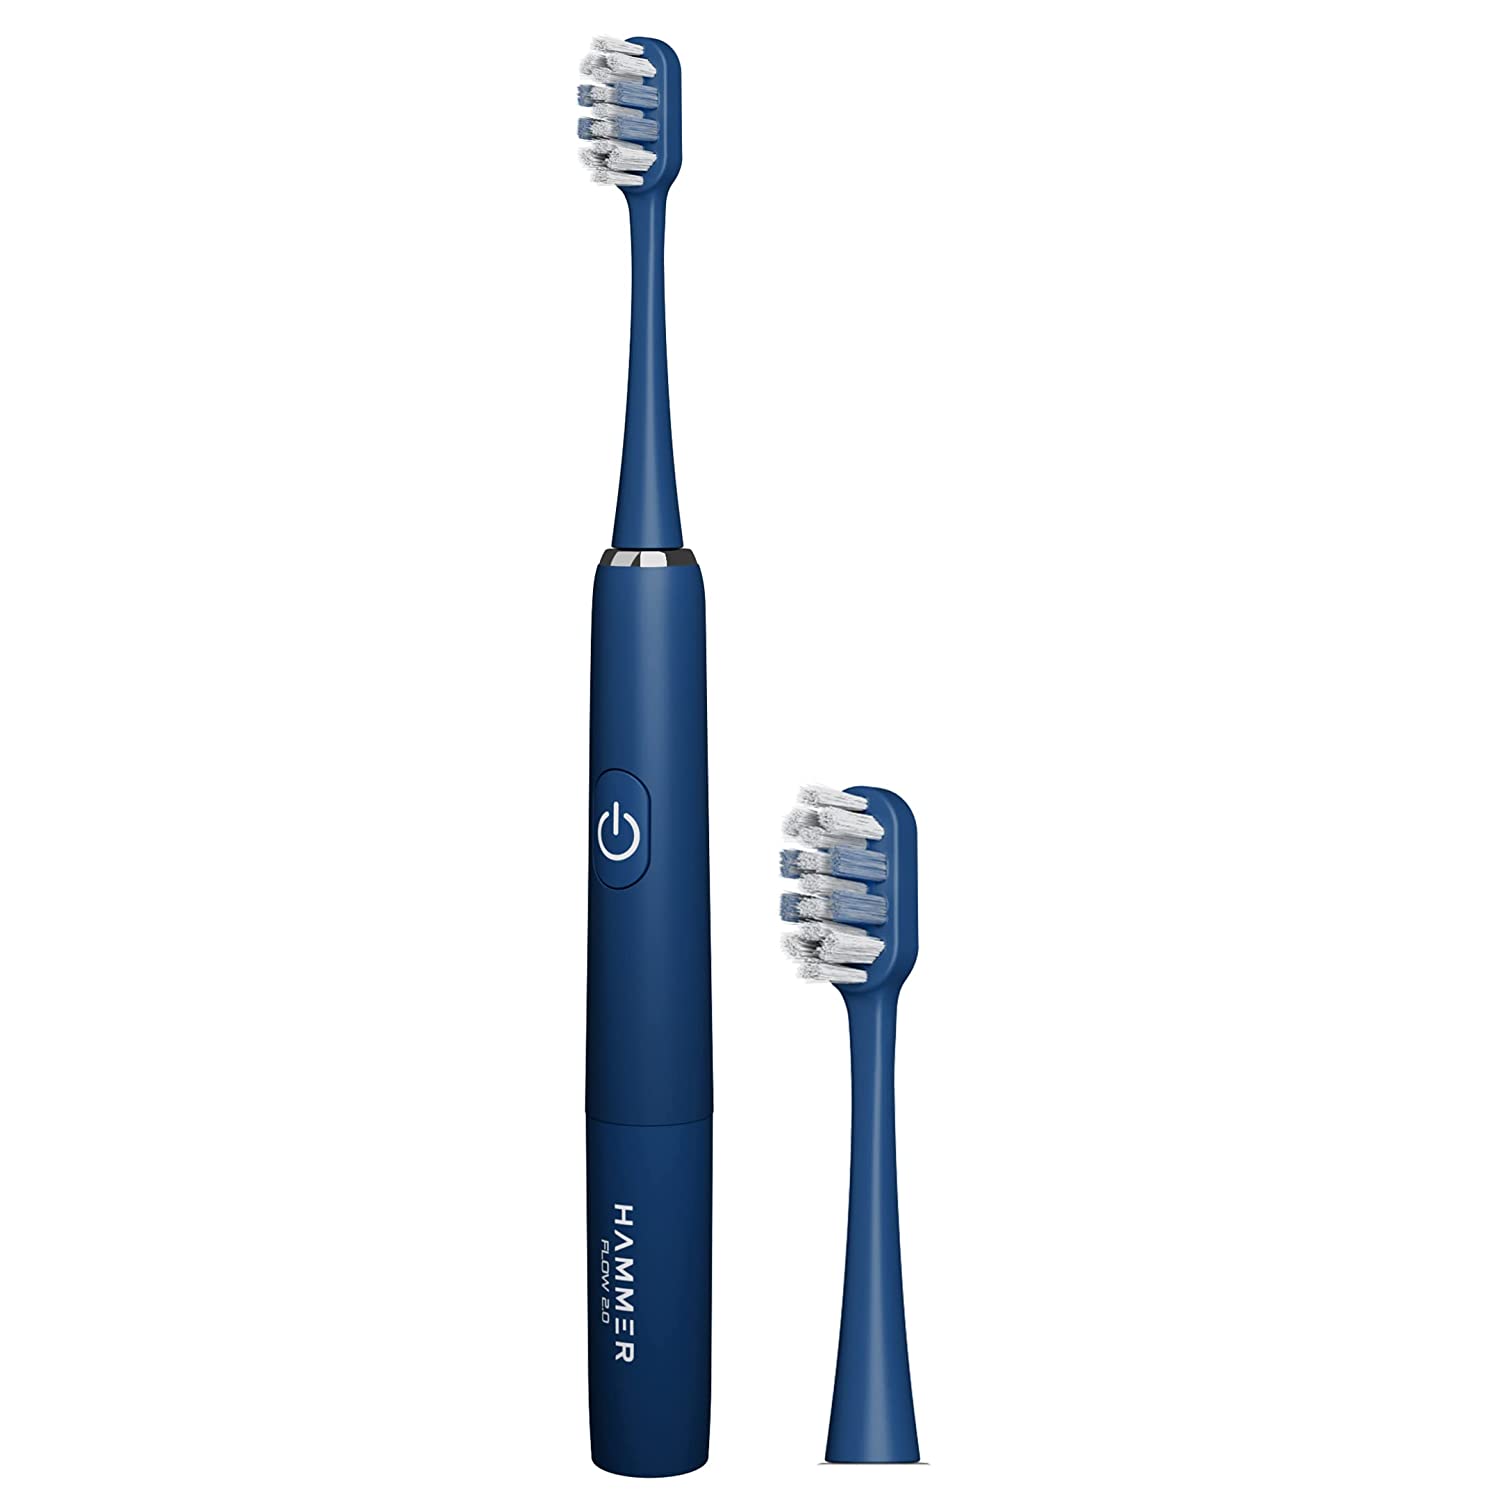 Hammer Flow 2.0 Electric Toothbrush 2 Brushing Modes, AAA Battery, Waterproof, Super-Soft Bristles (Blue)